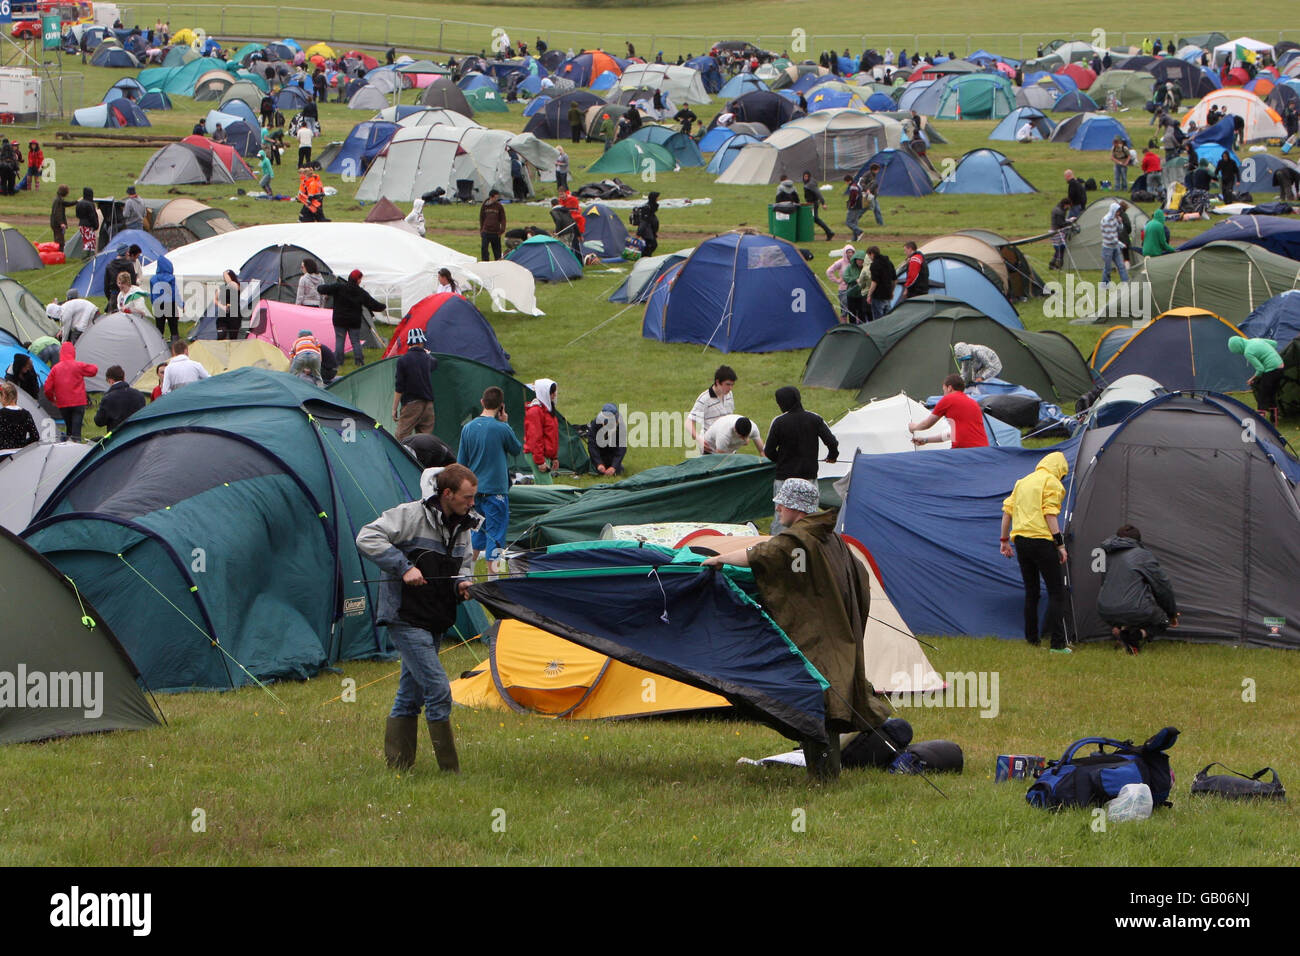 The first of 30,000 campers arrive for the Oxegen music festival which runs all weekend at Punchestown Racecourse in Co. Kildare. Stock Photo